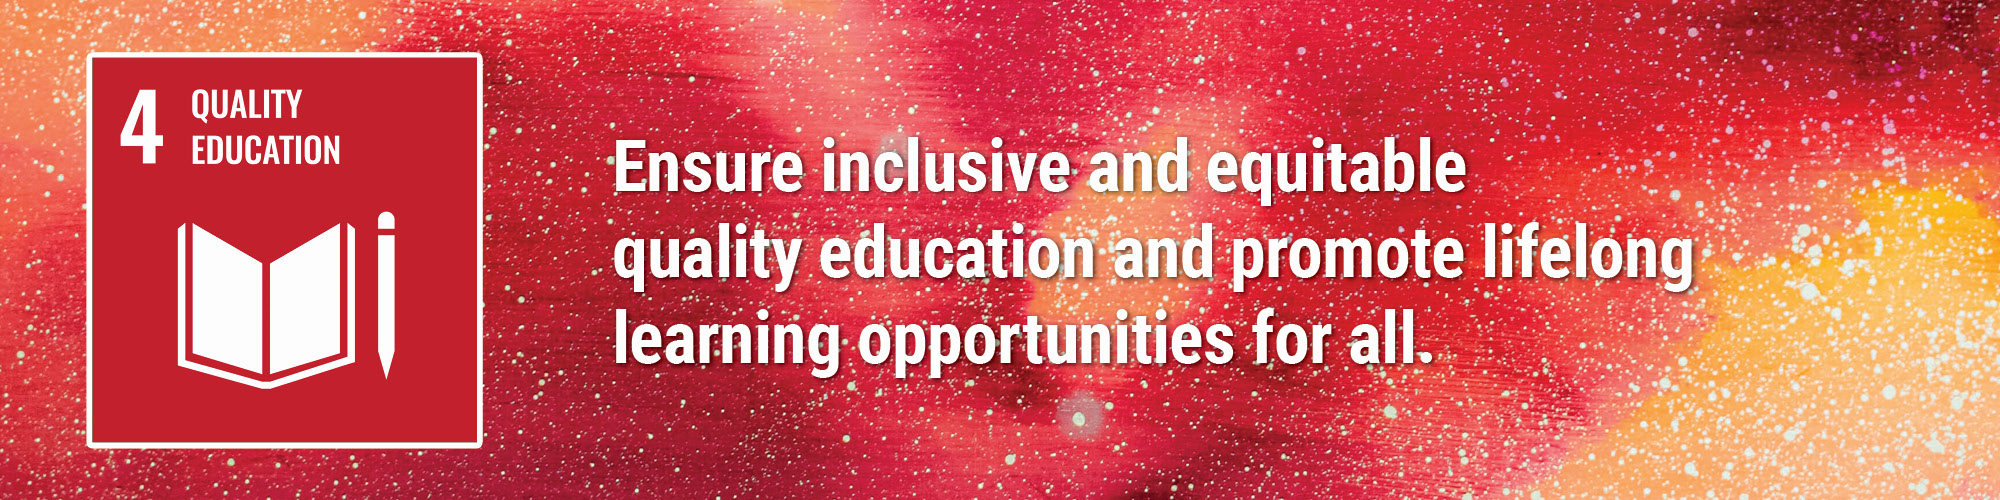 Ensure inclusive and equitable quality education and promote lifelong learning opportunities for all.